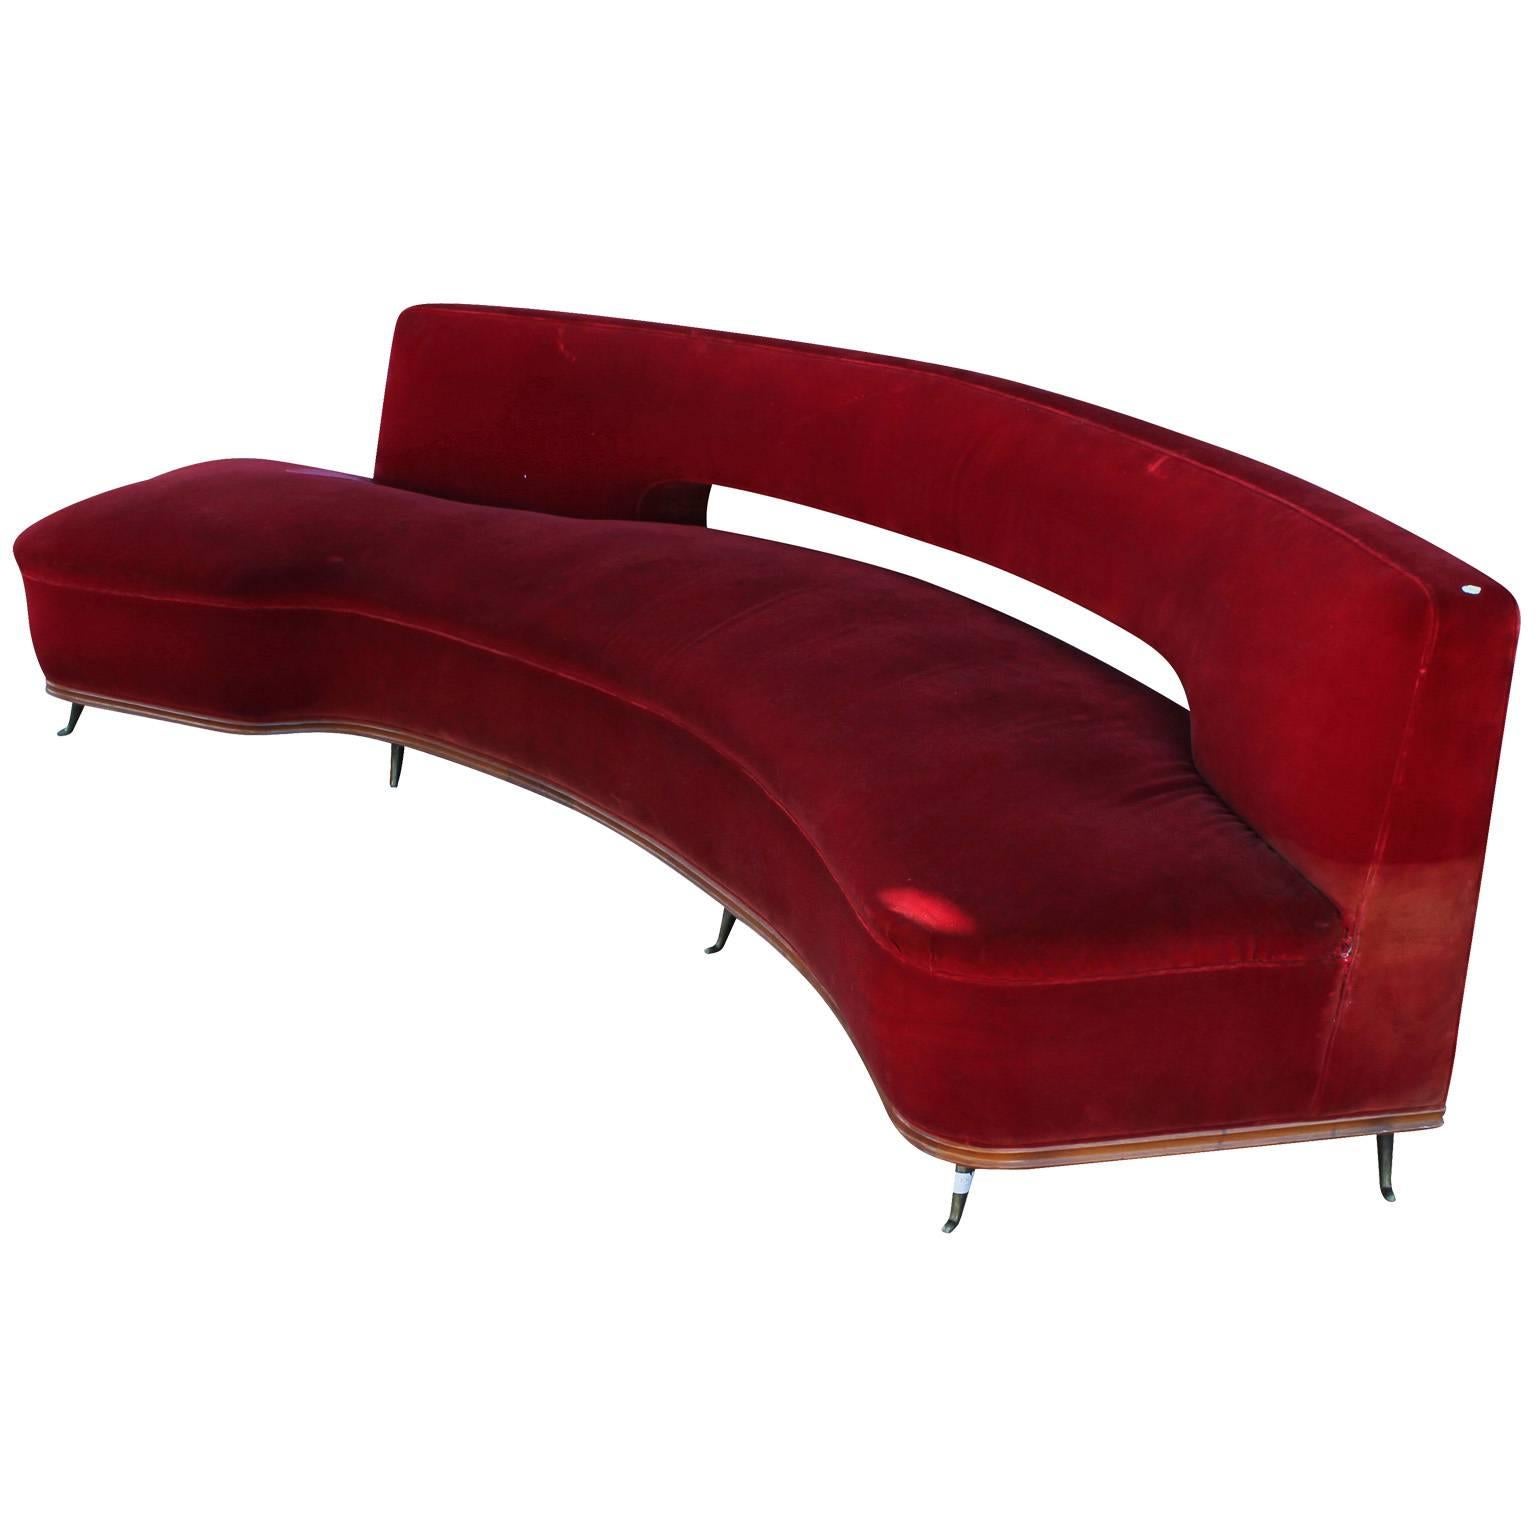 Glamorous and sculotural curved sofa by Federico Munari. Sofa has incredible curved lines and negative space. Sofa is trimmed with a carved wood base and six delicate brass legs in front and four tapered wood legs in back. Upholstered in red velvet